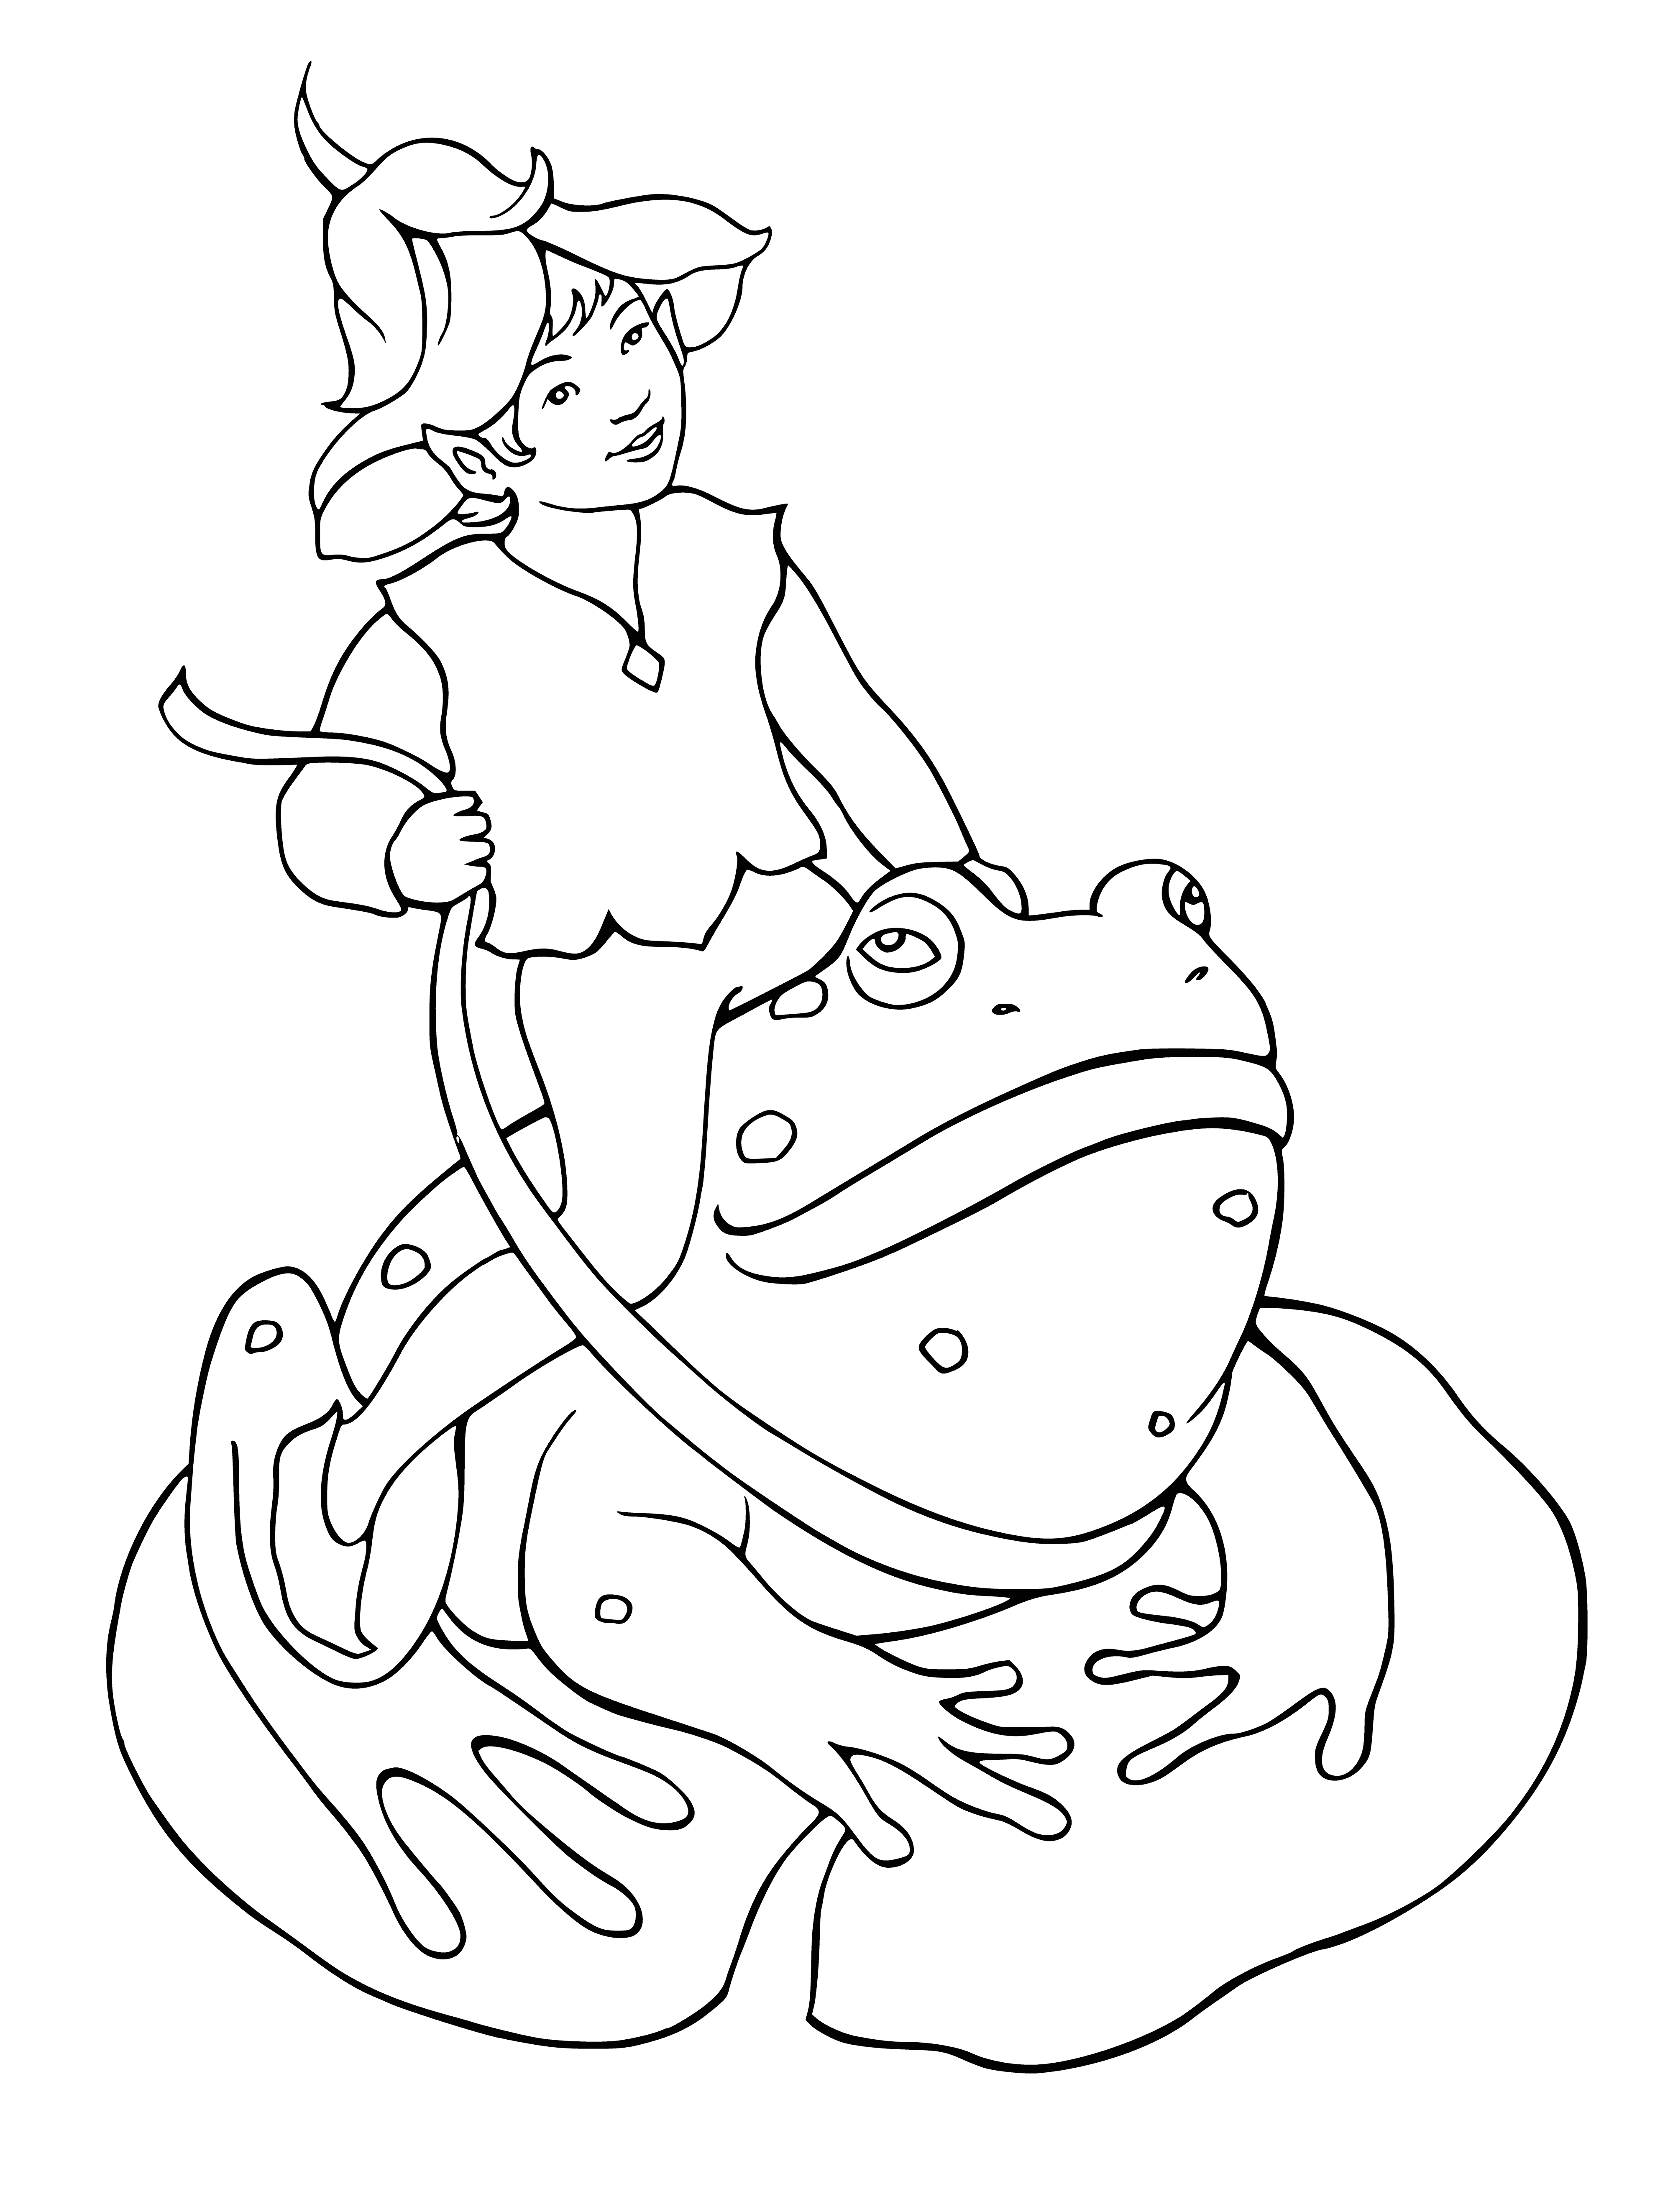 coloring page: Elf riding toad, waving and happy. Toad a different color with spots.